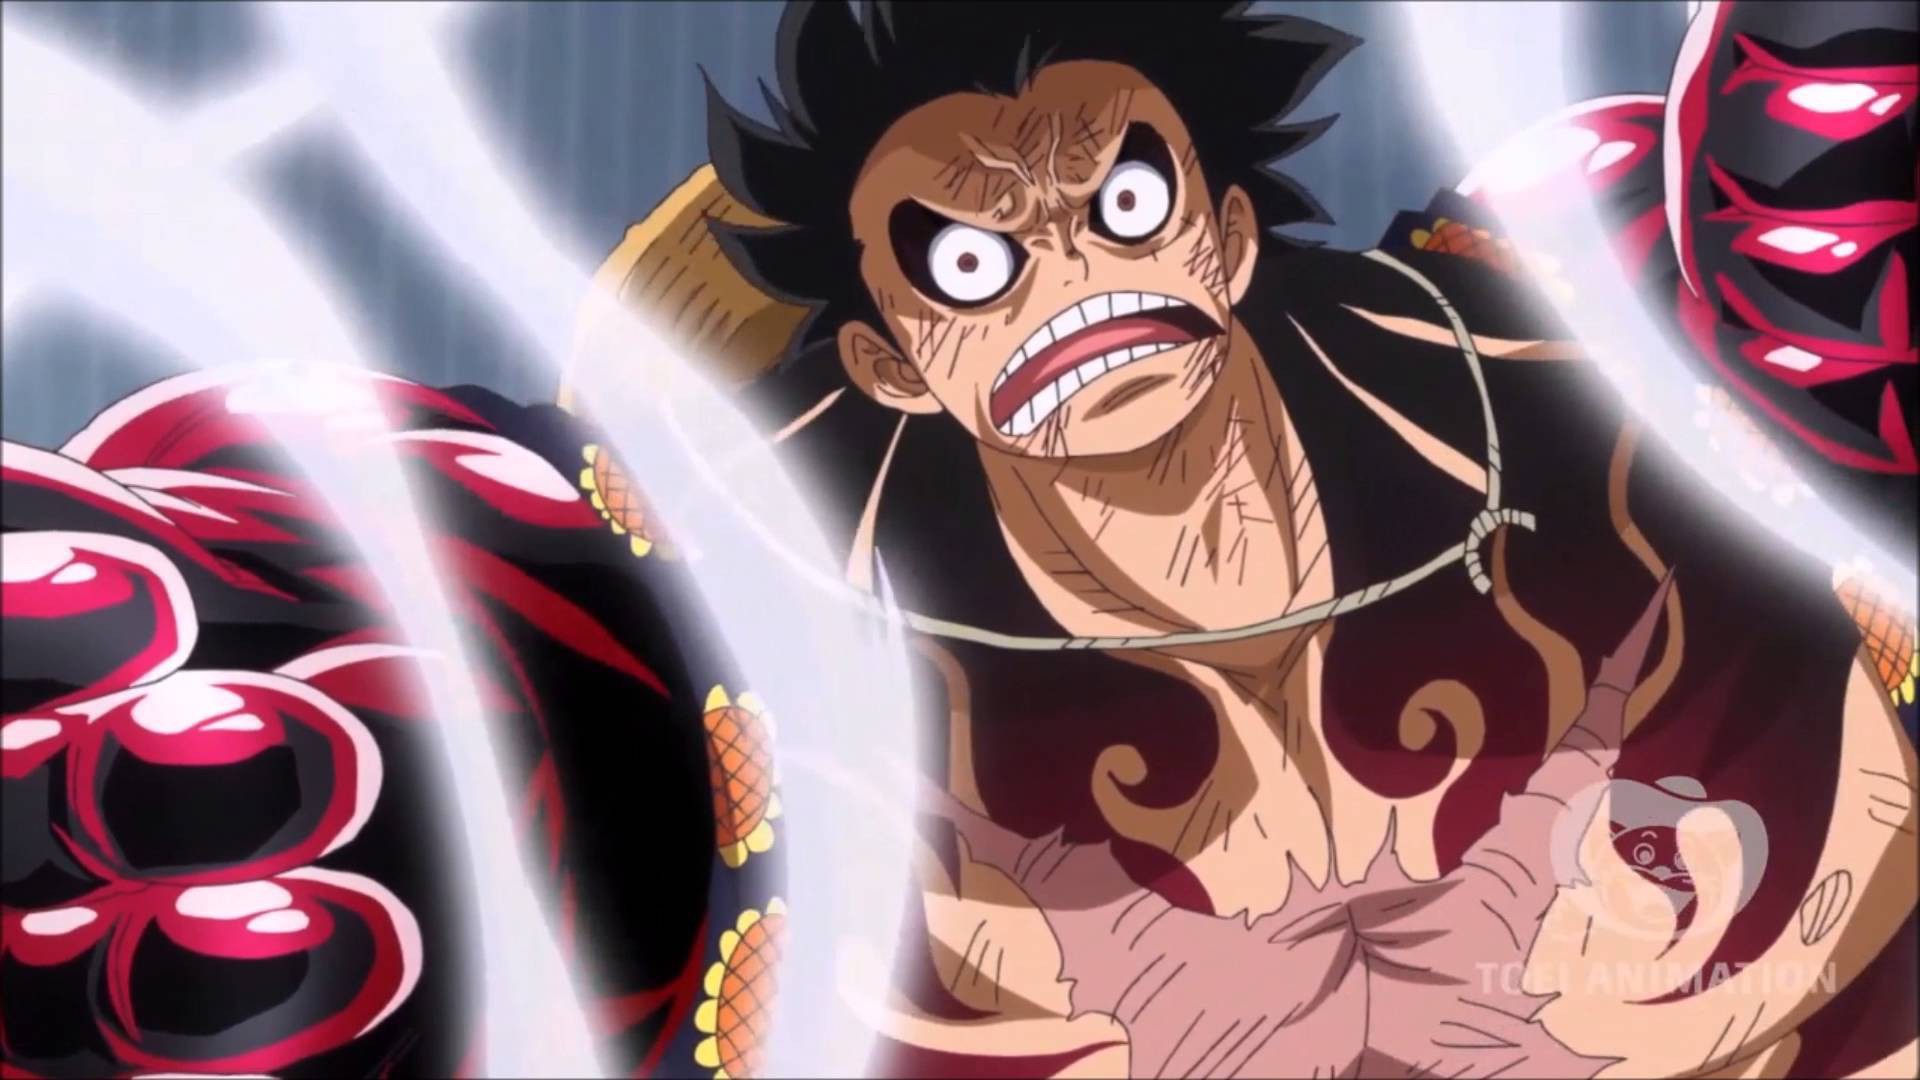 This state sees Luffy\'s body inflate like a balloon while also becoming incredibly muscular and powerful. The image featuring Gear 4 Luffy is an impressive sight to behold, with his intense expression and imposing figure. If you\'re a fan of the One Piece series or just love impressive anime visuals, then be sure to check it out.